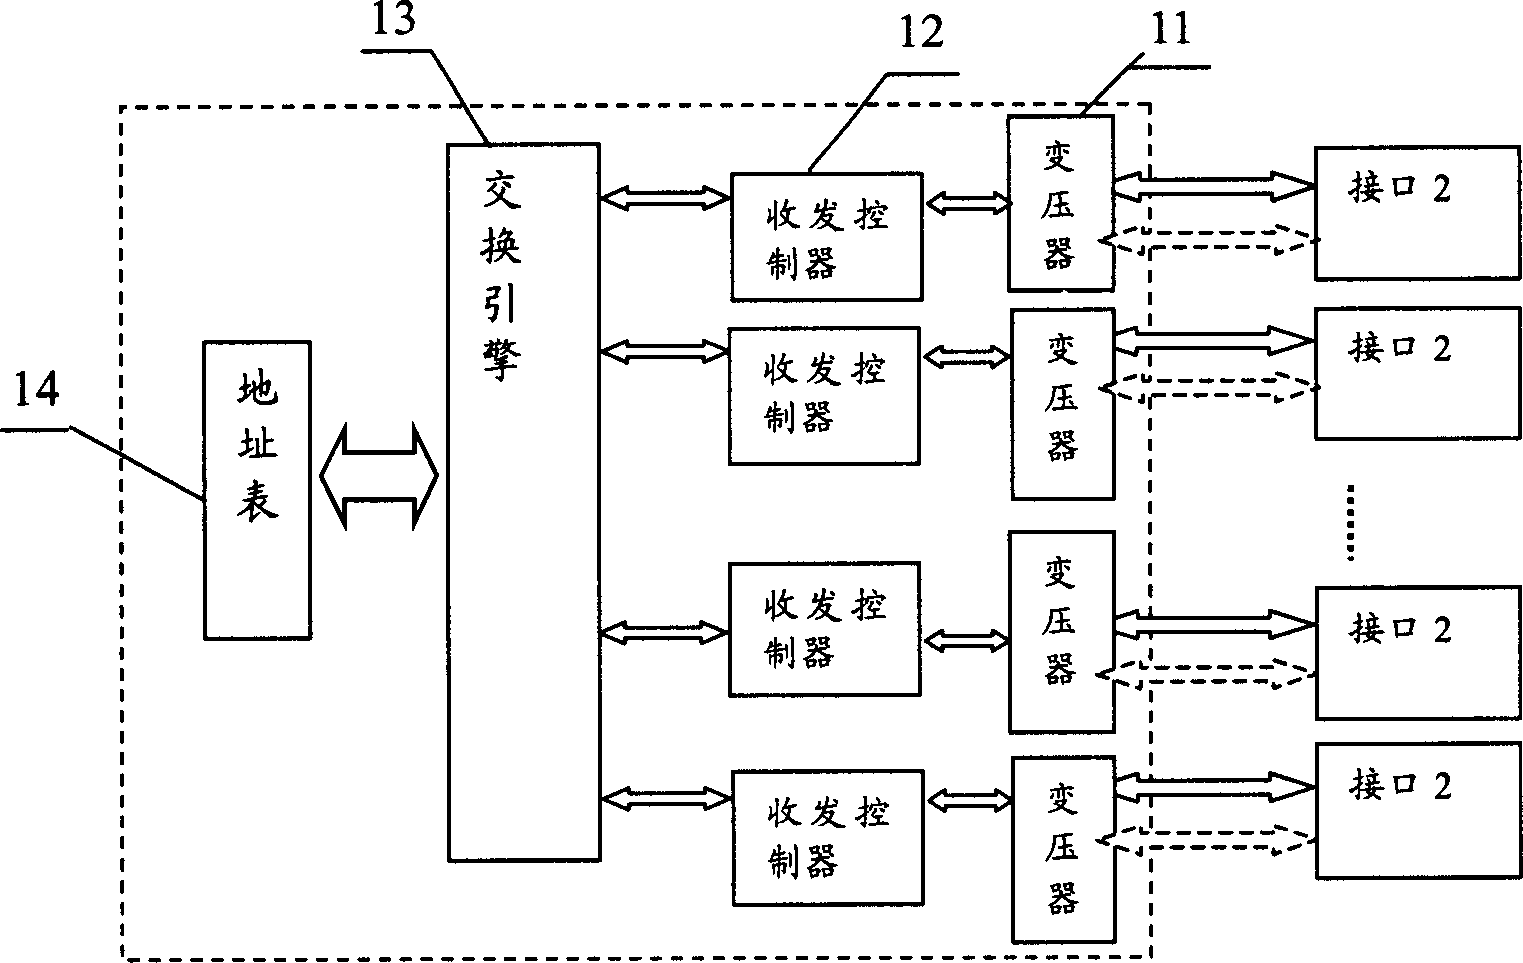 Ethernet switch for implementing redundancy power supply and implementing method thereof